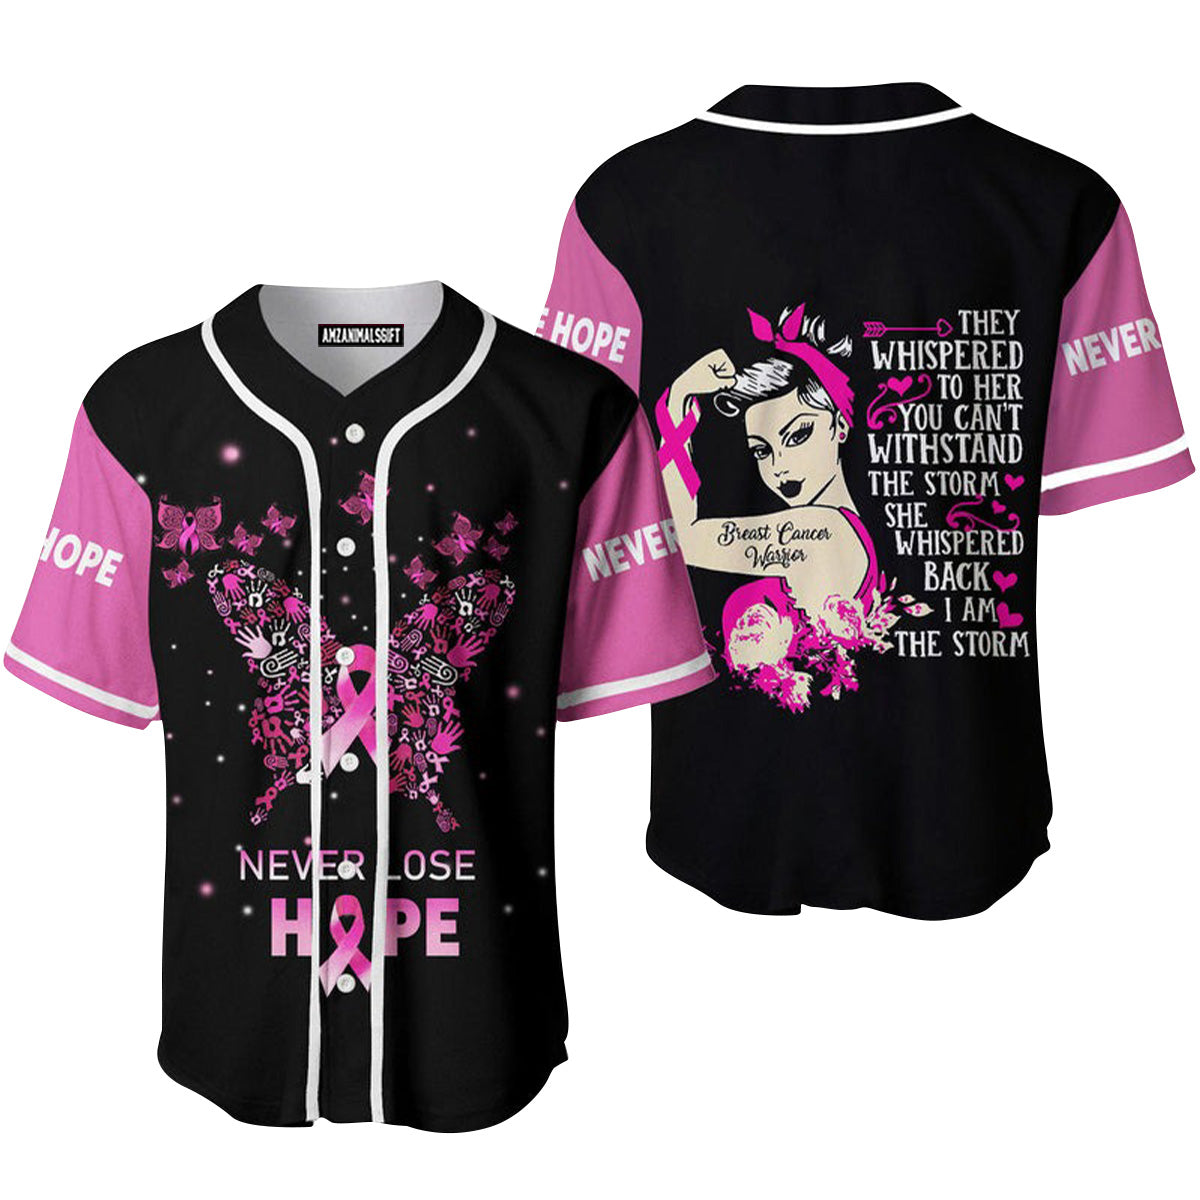 Breast Cancer Warrior Never Lose Hope Baseball Jersey, Perfect Outfit For Men And Women On Breast Cancer Survivors Baseball Team Baseball Fans